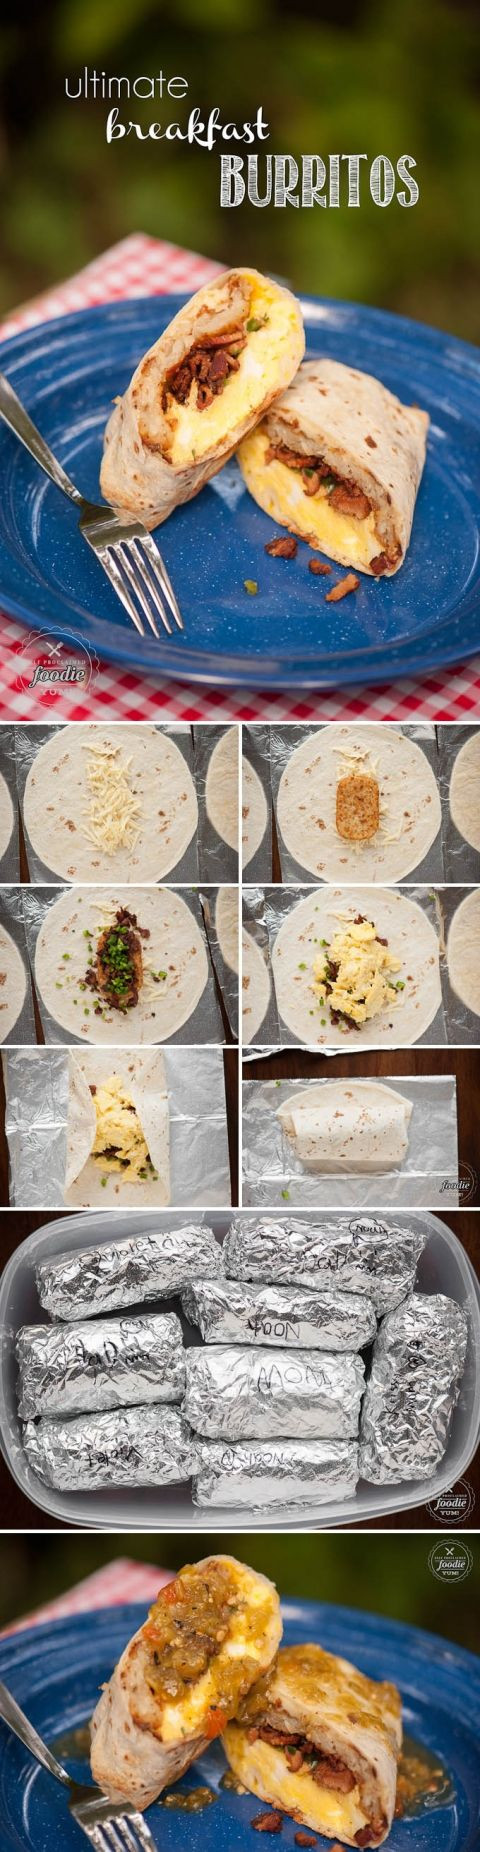 Make Ahead Breakfast Burritos With Hash Browns
 These filling and tasty Ultimate Breakfast Burritos are